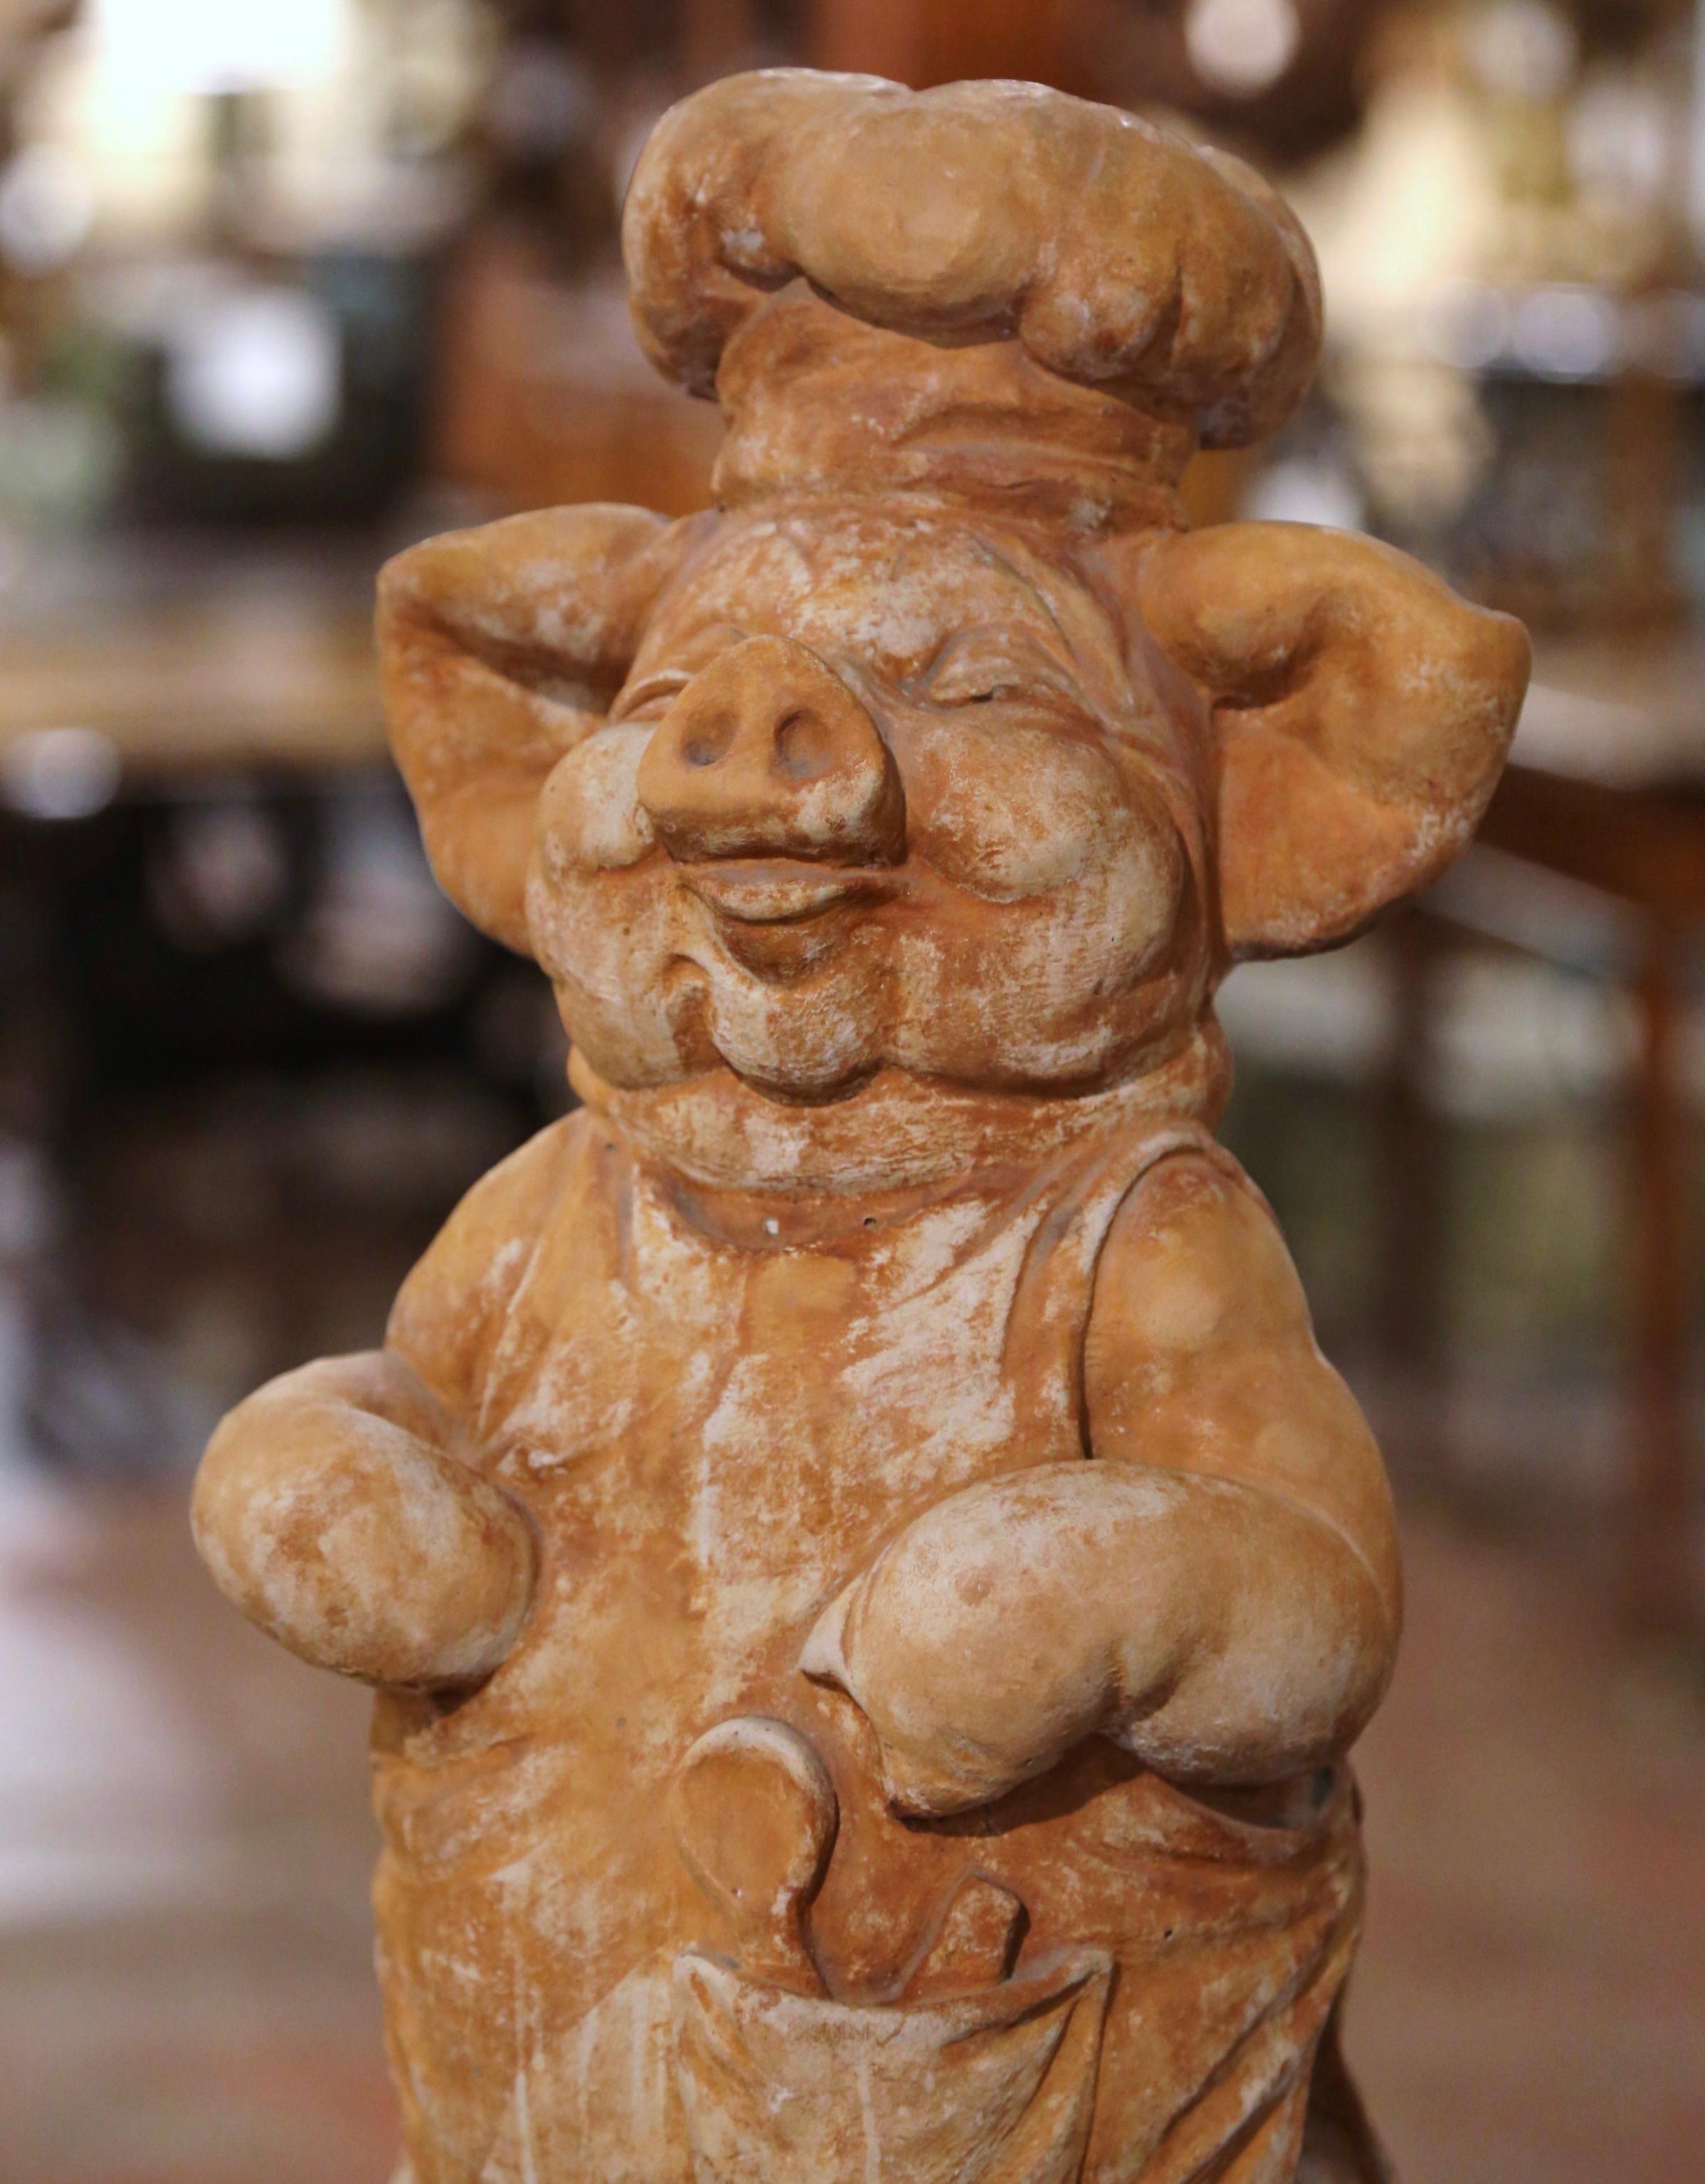 Decorate a kitchen counter or patio with this antique stone pig sculpture. Crafted in France circa 1970 and carved of concrete, the sculpture features a smiling pig standing on a round base. The tall cheerful pig composition is in excellent